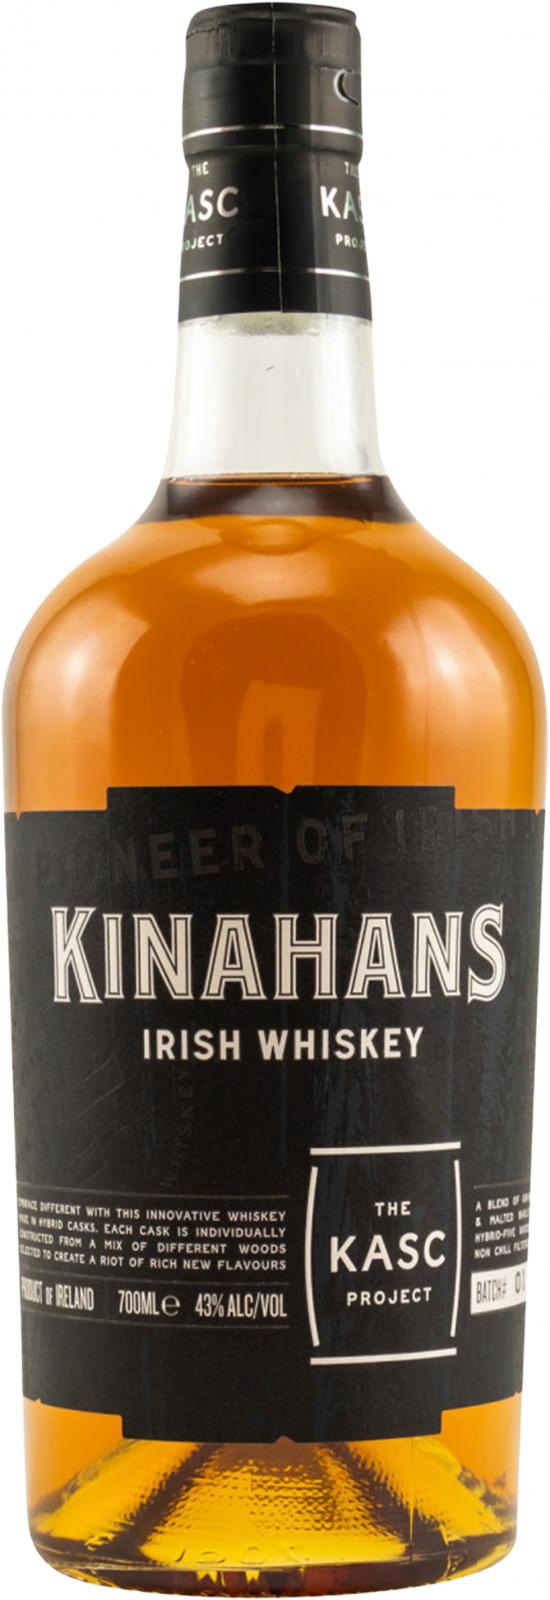 - Kasc Ratings Whiskybase - reviews Kinahan\'s The and Project